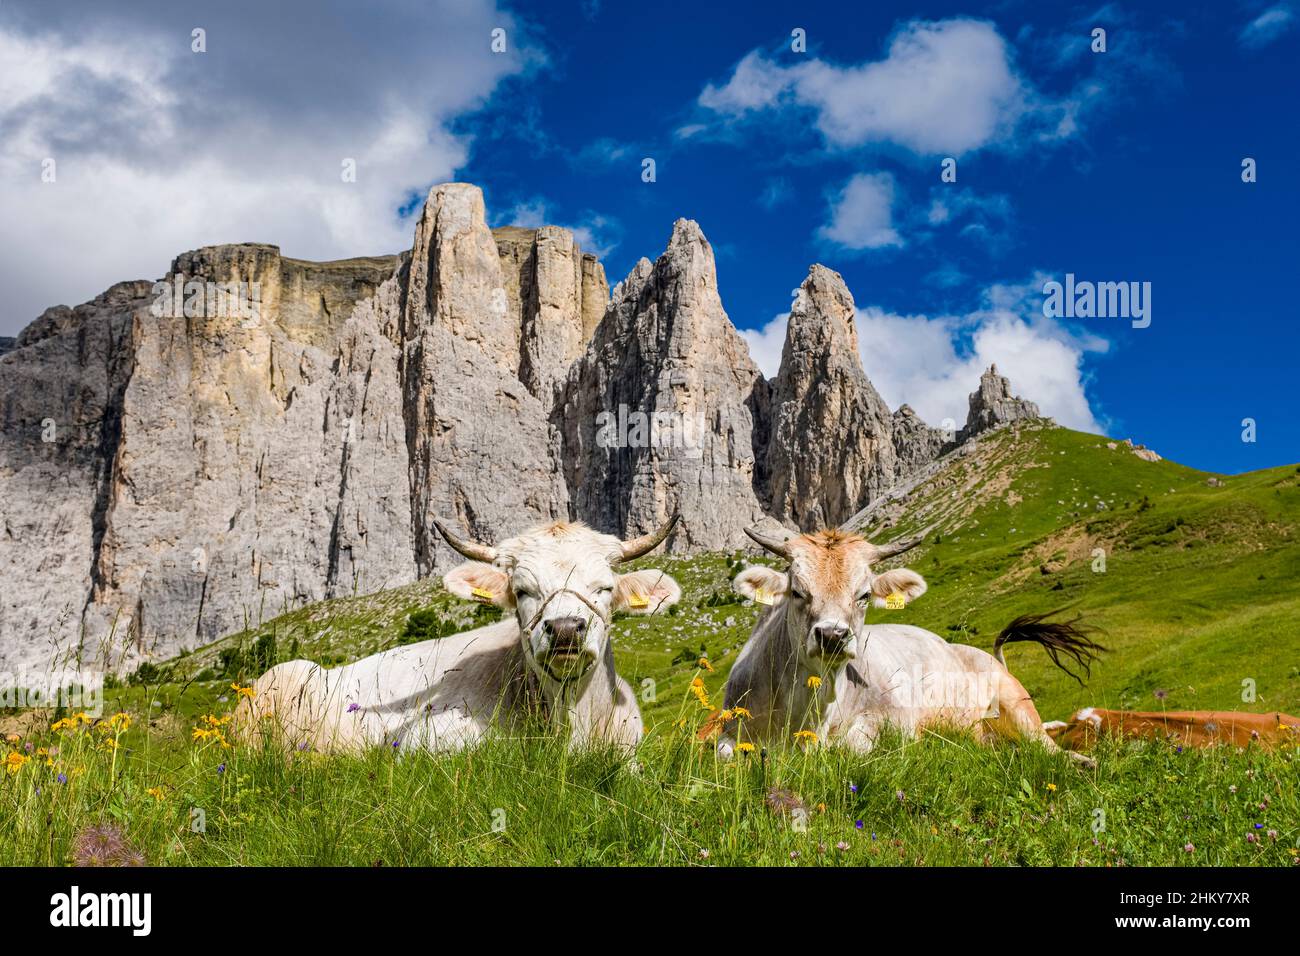 Calfs are grazing on a pasture at Sella Pass, the Sella Towers, four summits in the Sella group, in the distance. Stock Photo